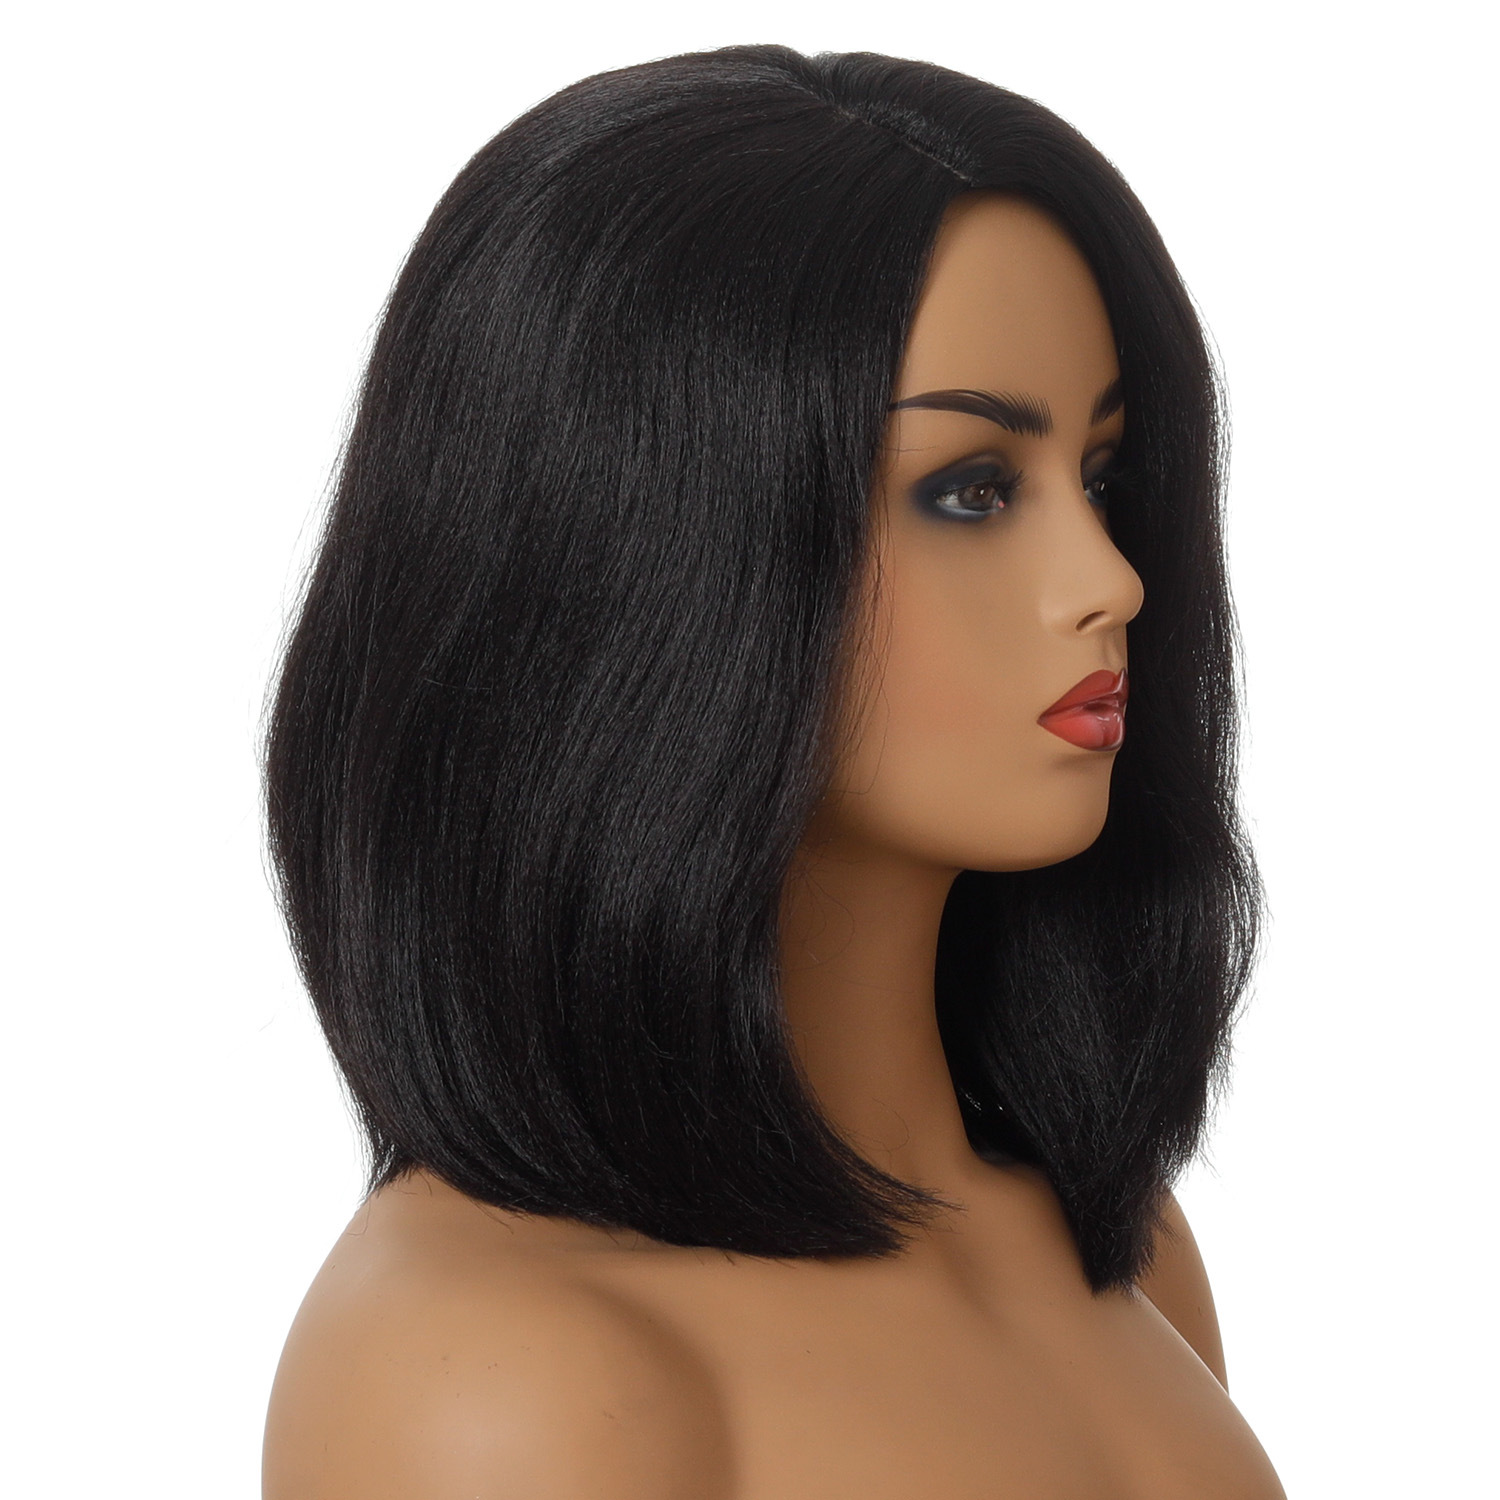 Stylish black synthetic wig featuring short straight hair, designed for women